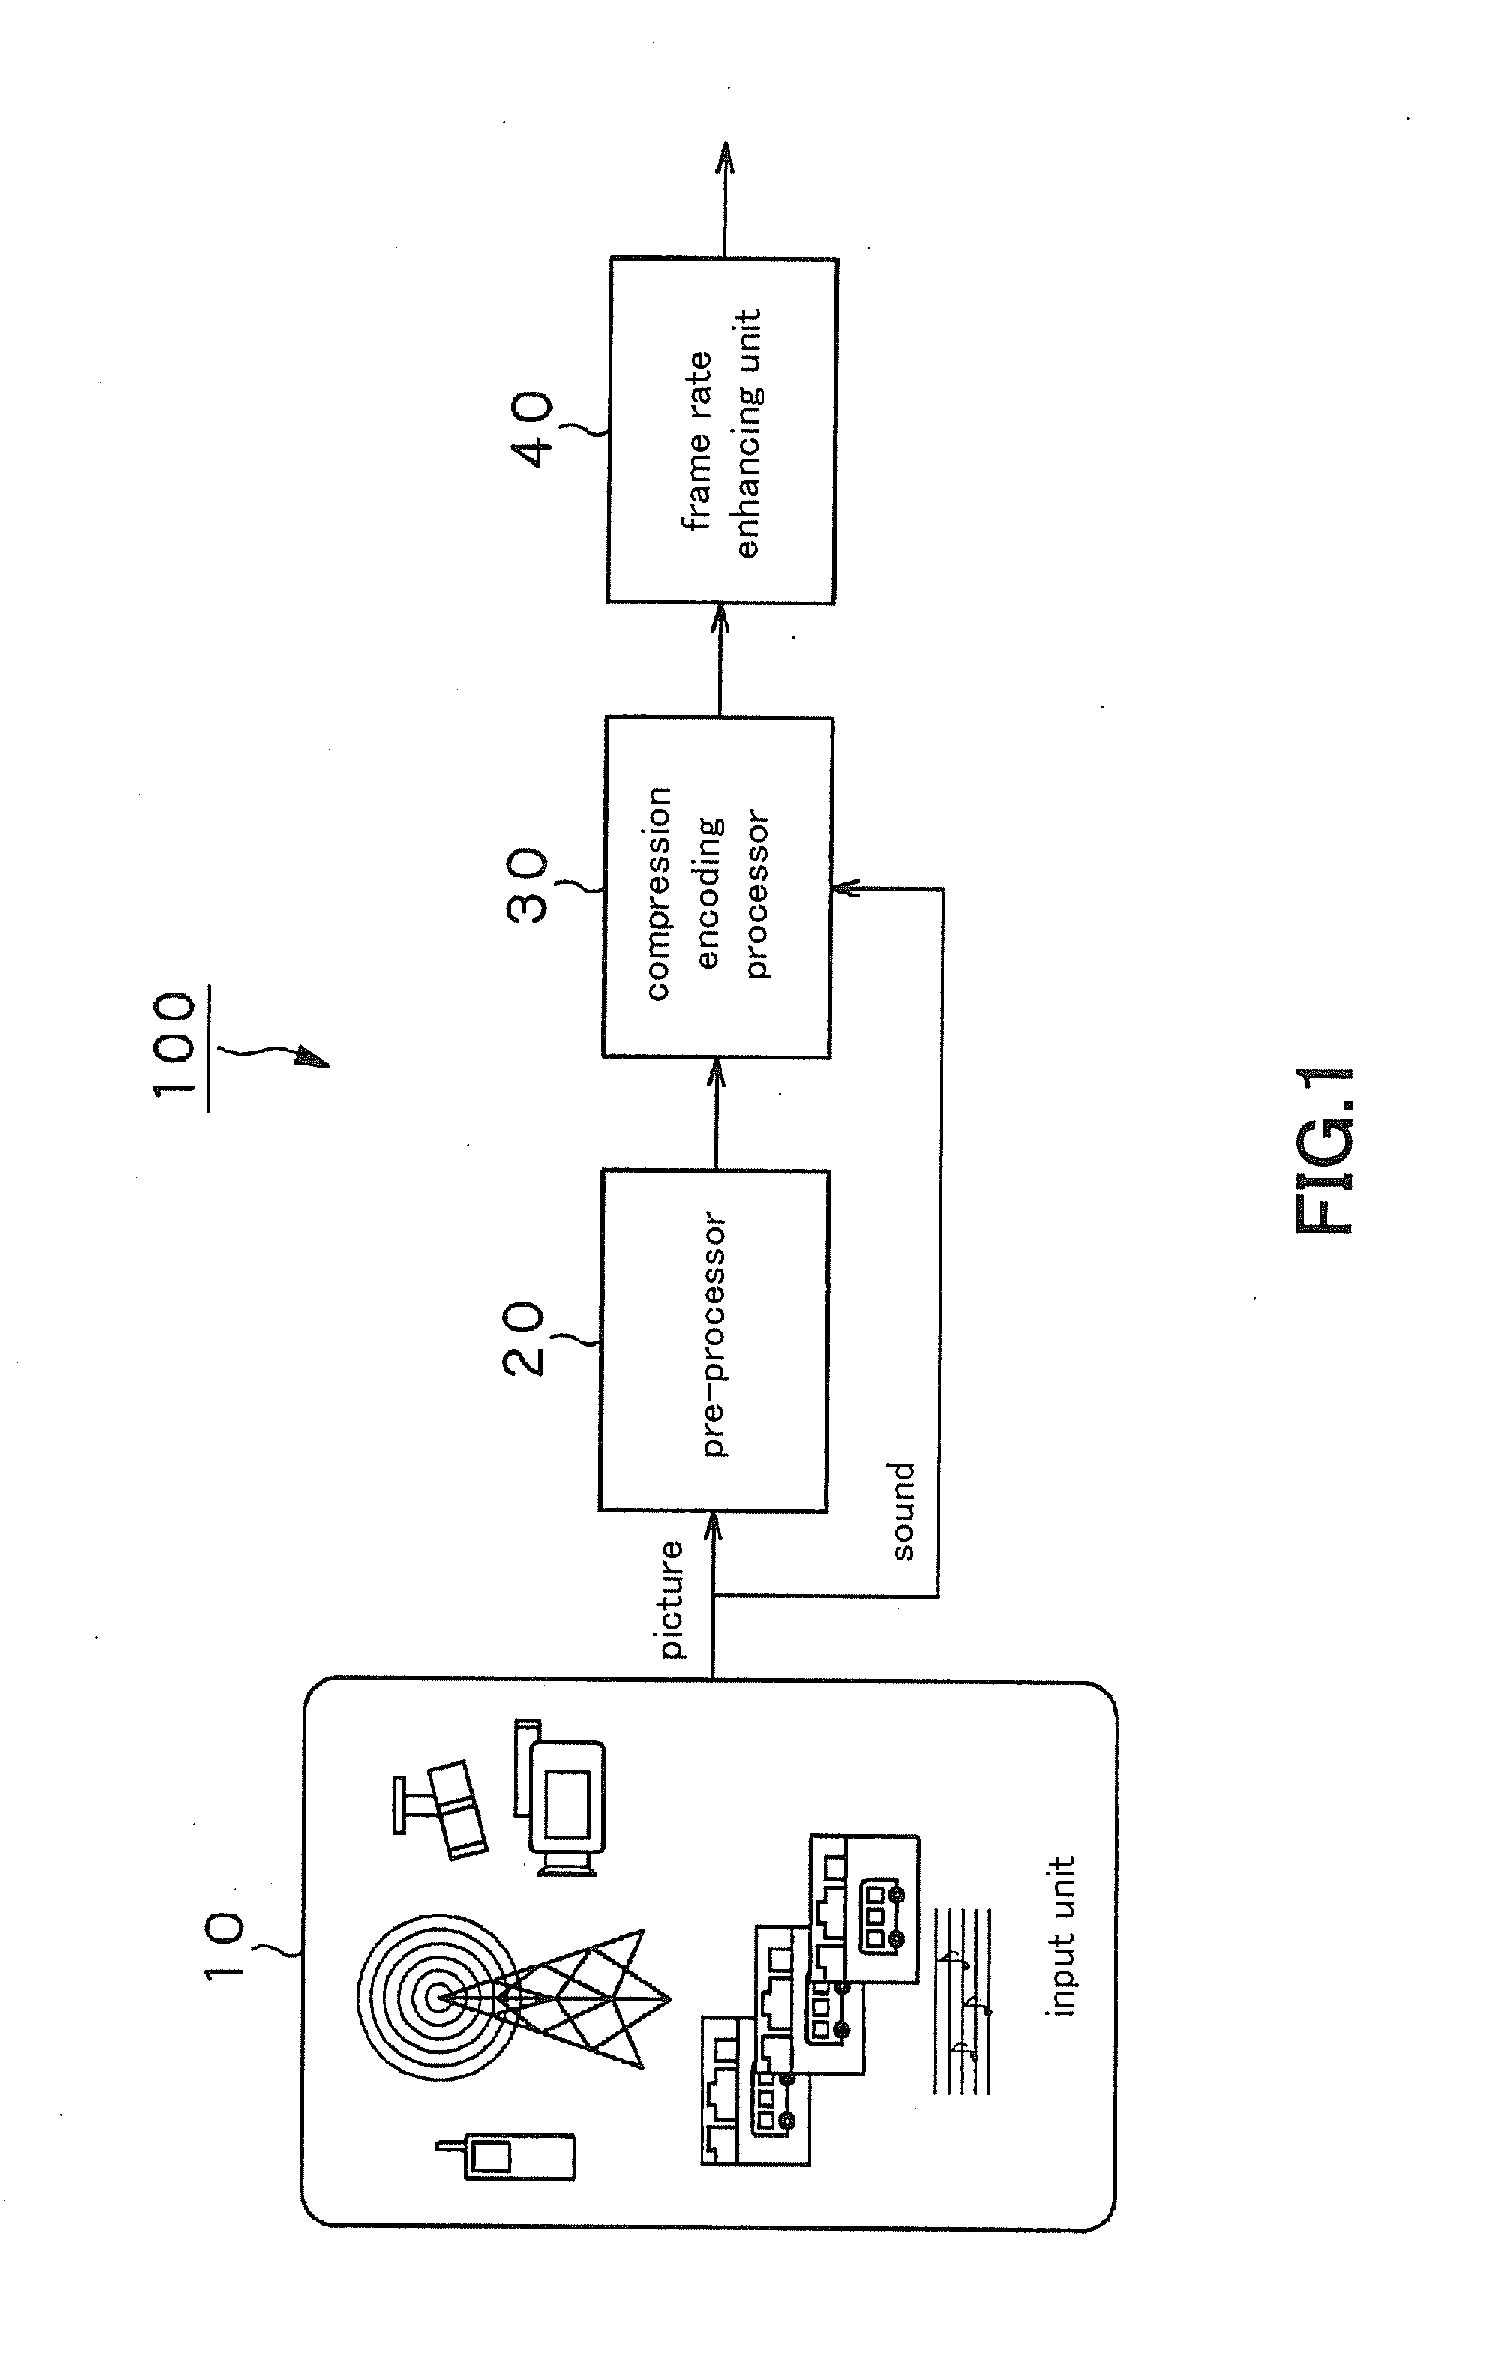 Picture signal conversion system